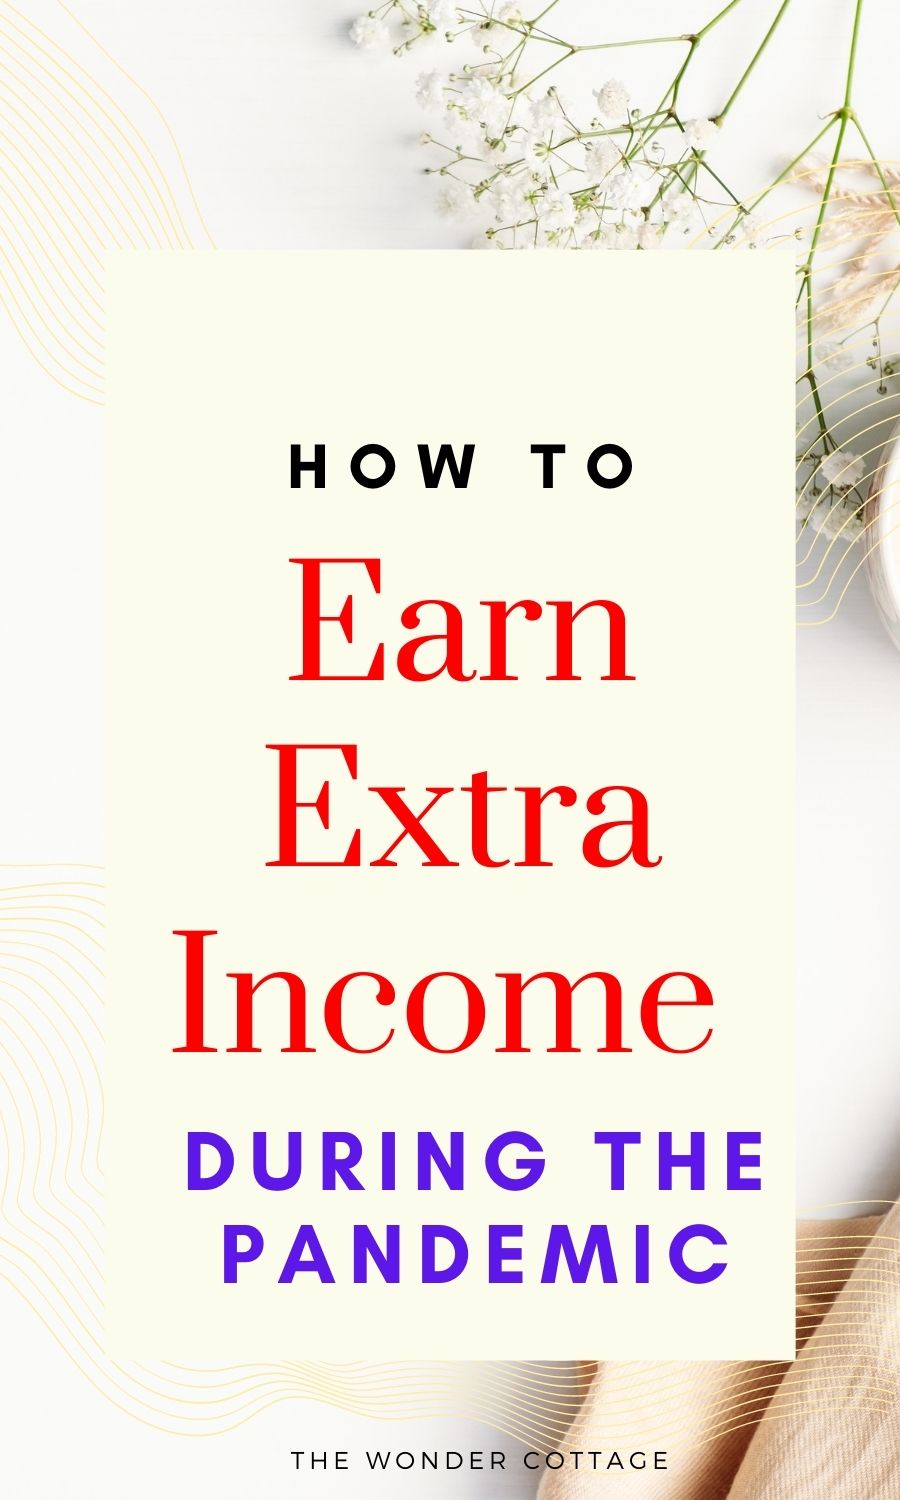 How To Earn Extra Income During The Pandemic